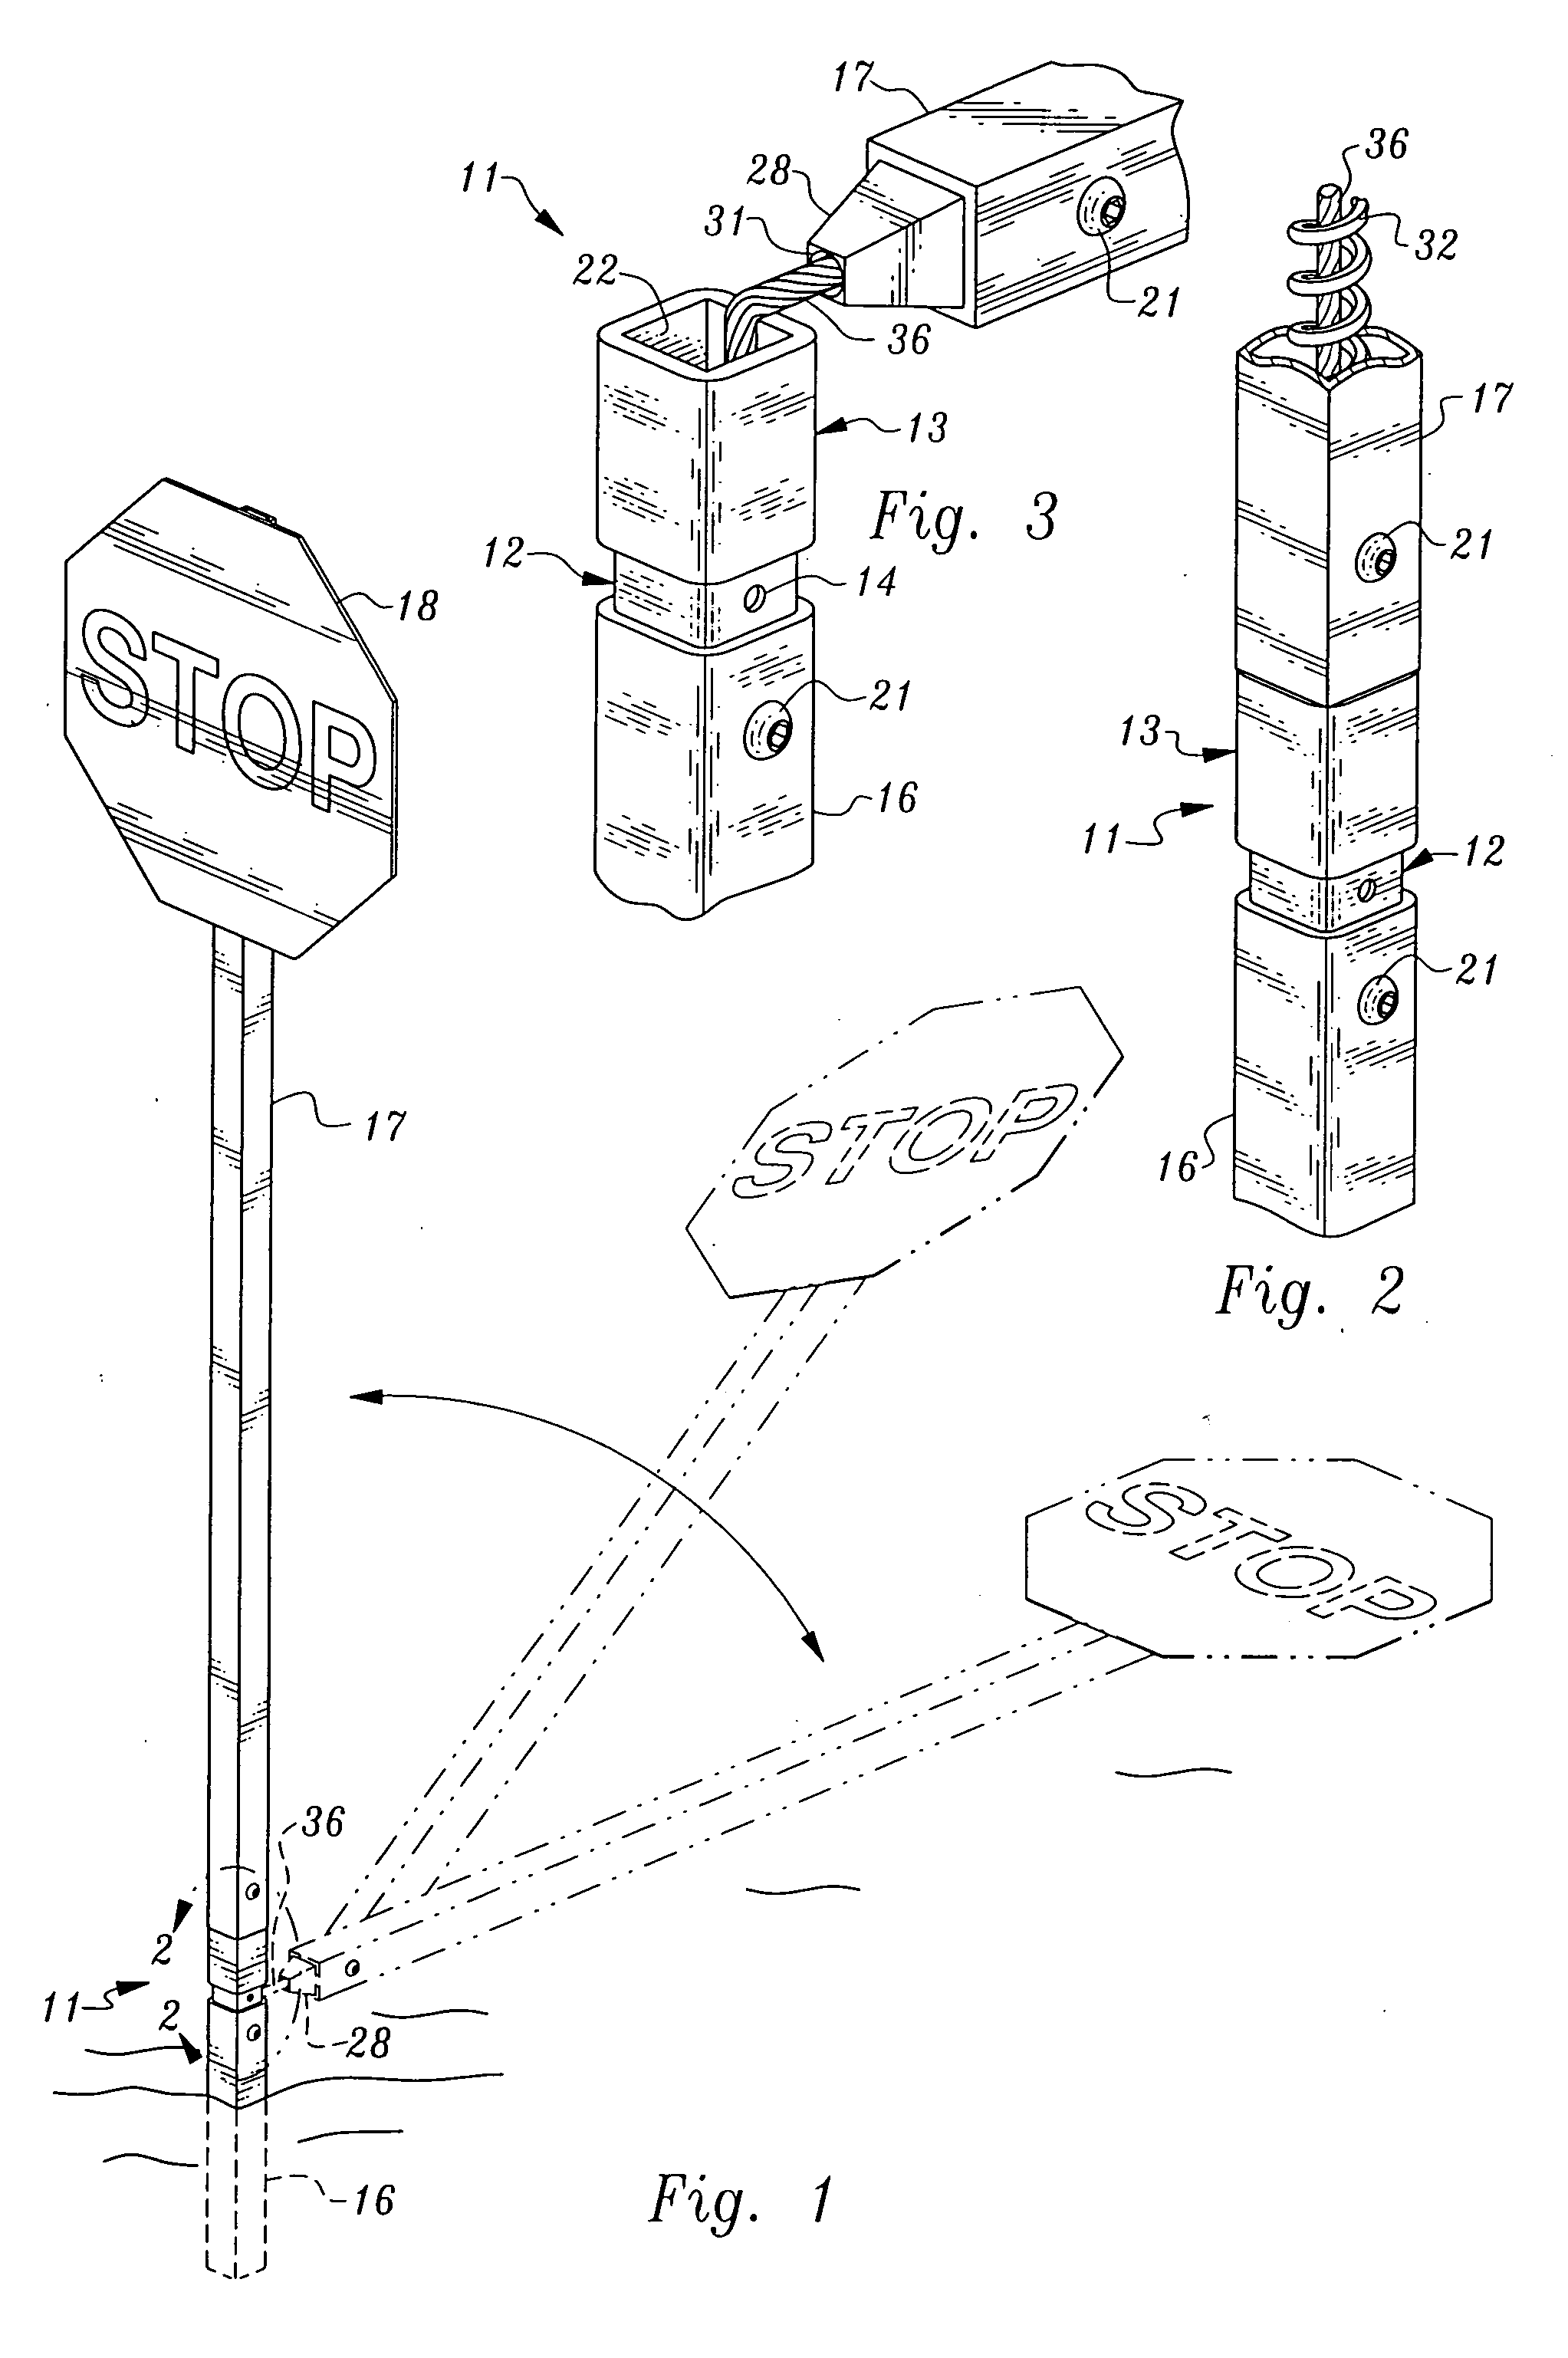 Reusable, breakaway connector section for highway sign posts